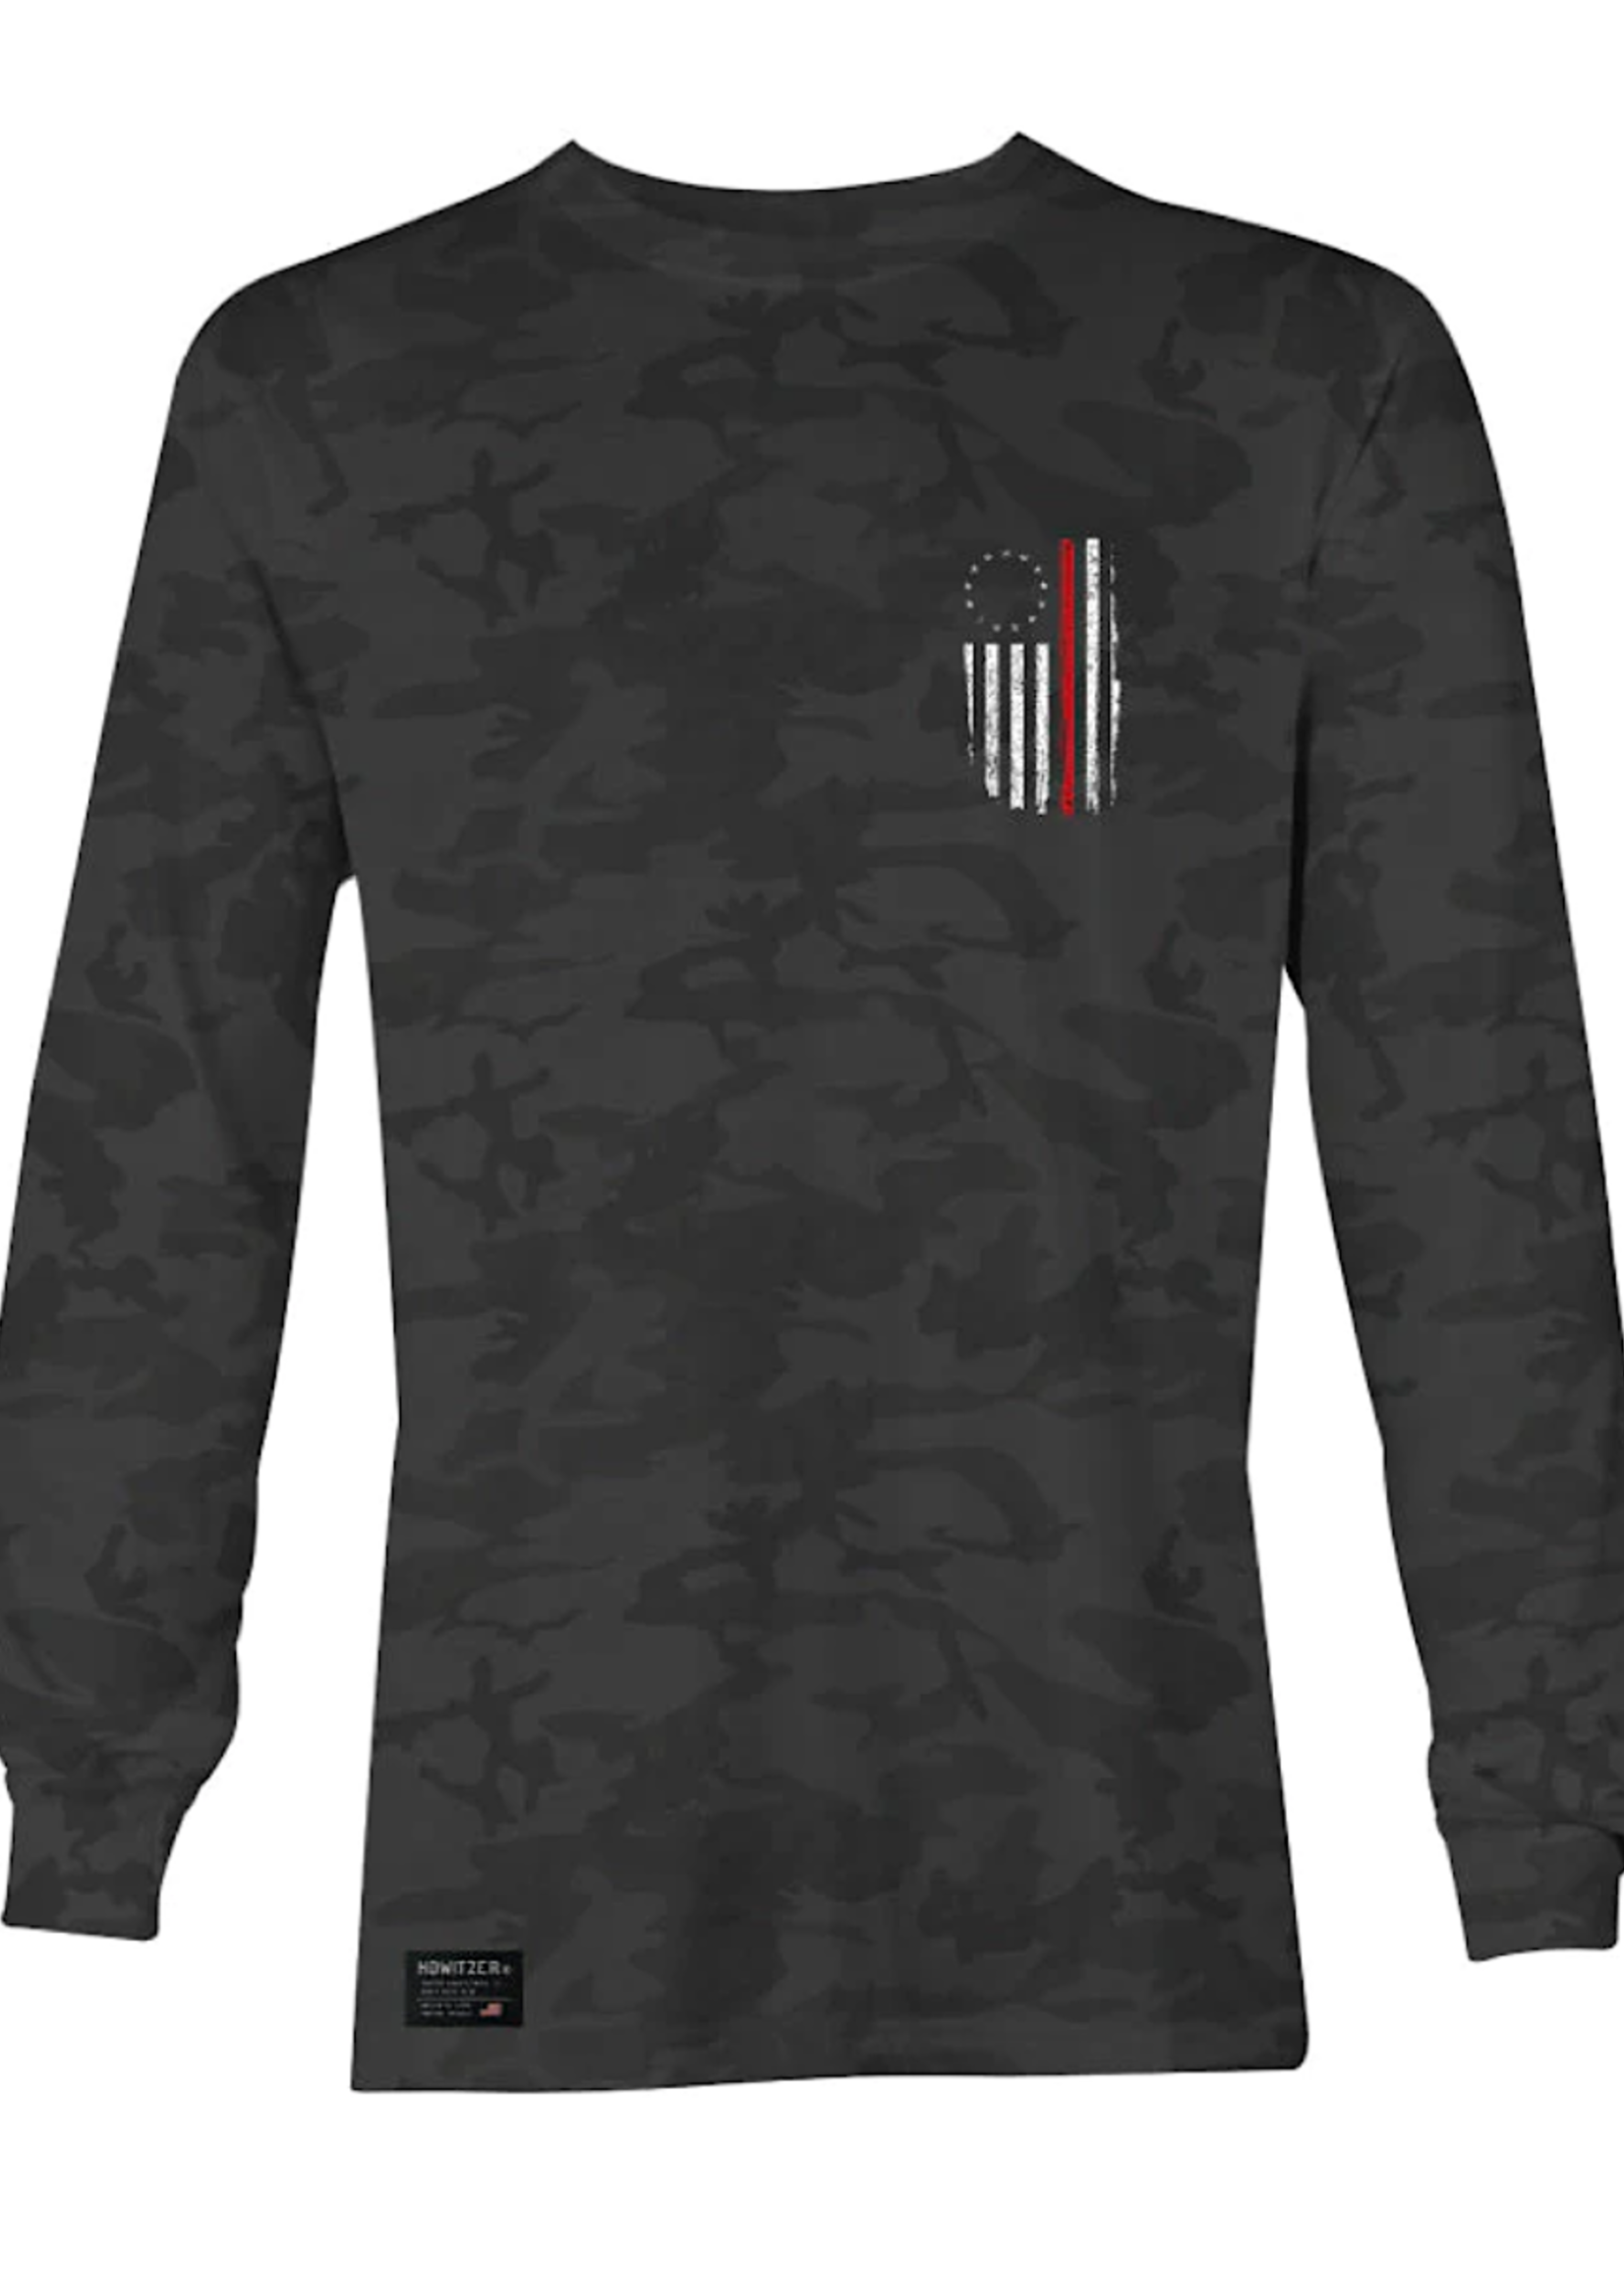 Howitzer Support The Red L/S Tee-Black Camo